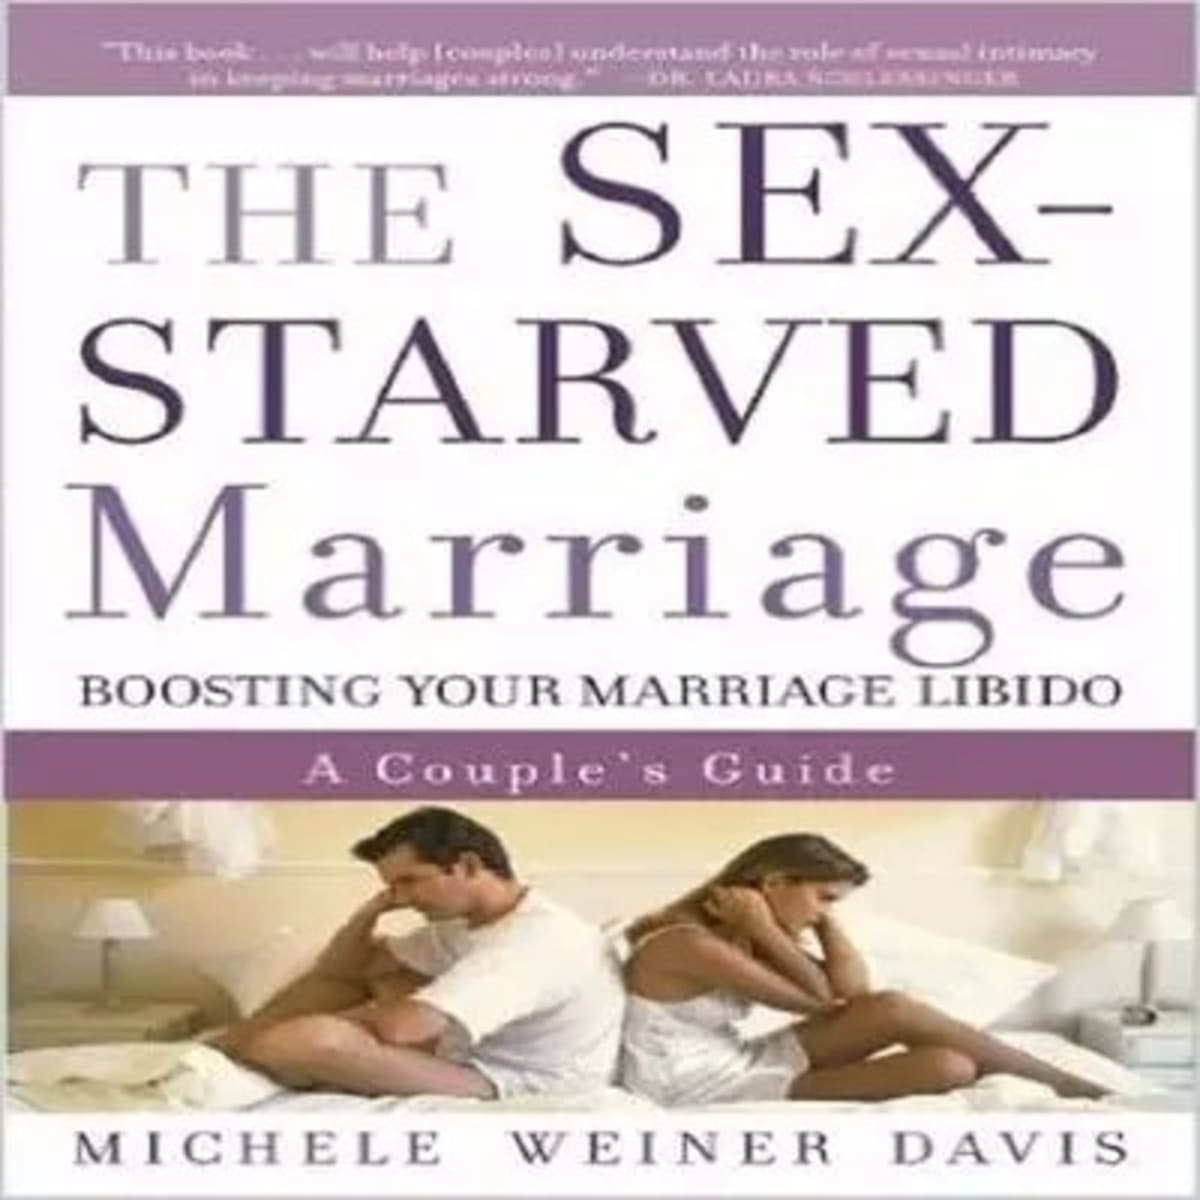 The Sex-starved Marriage - Boosting Your Marriage Libido